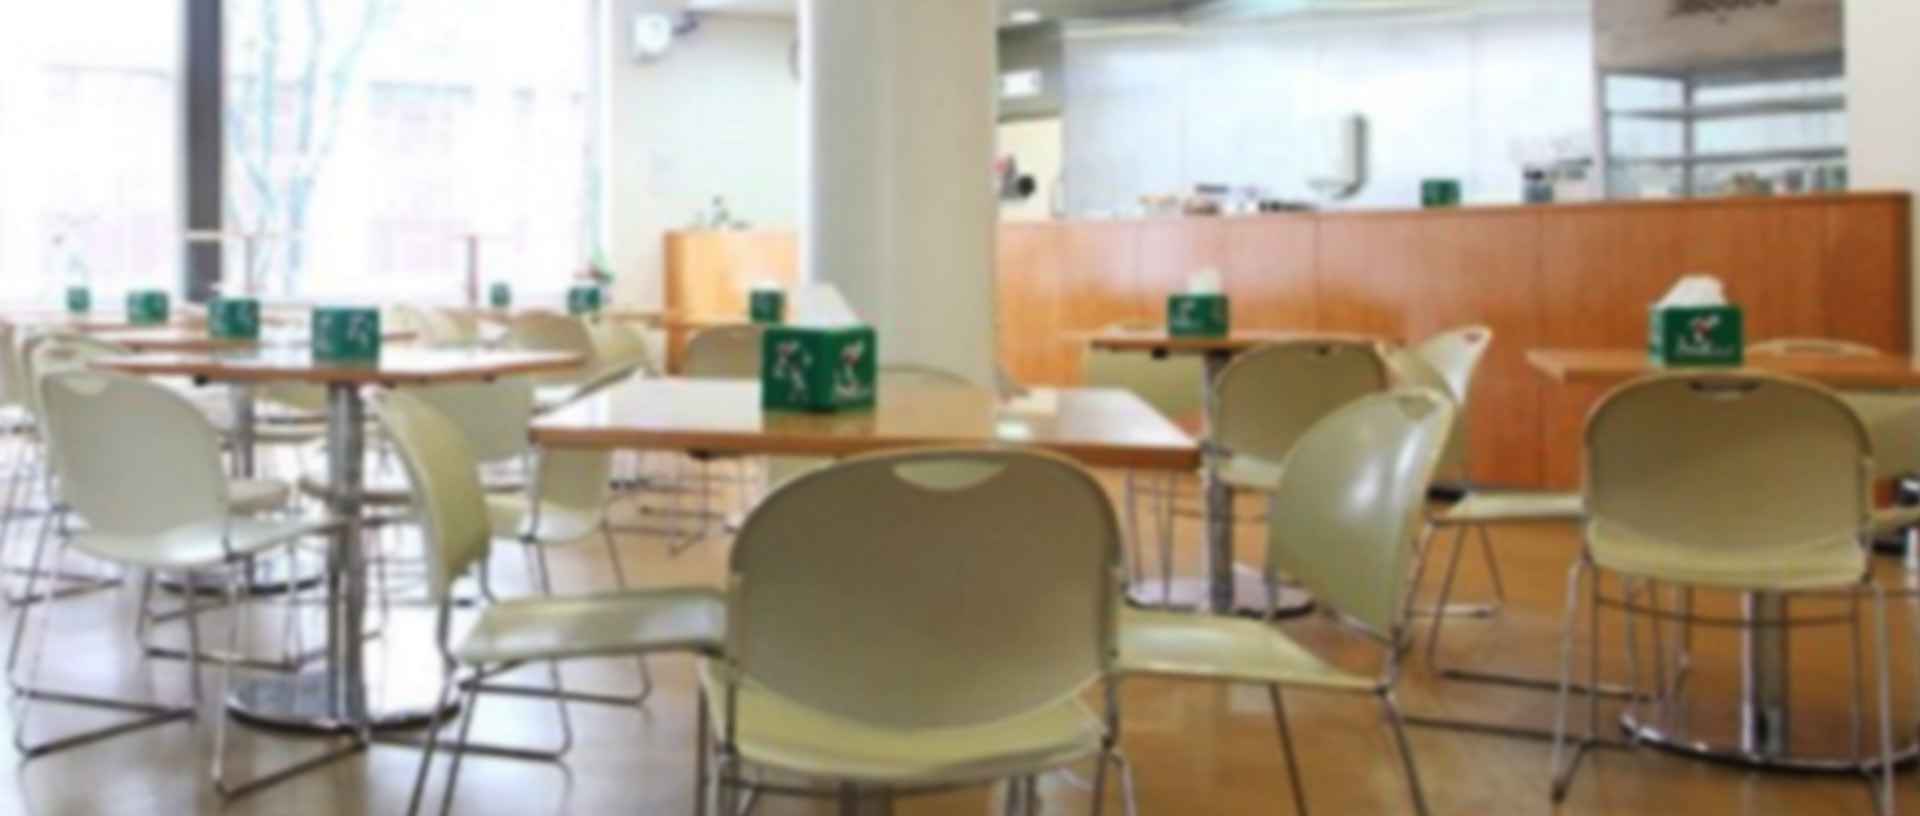 Dining area for students and staff of the Faculty of Sciences